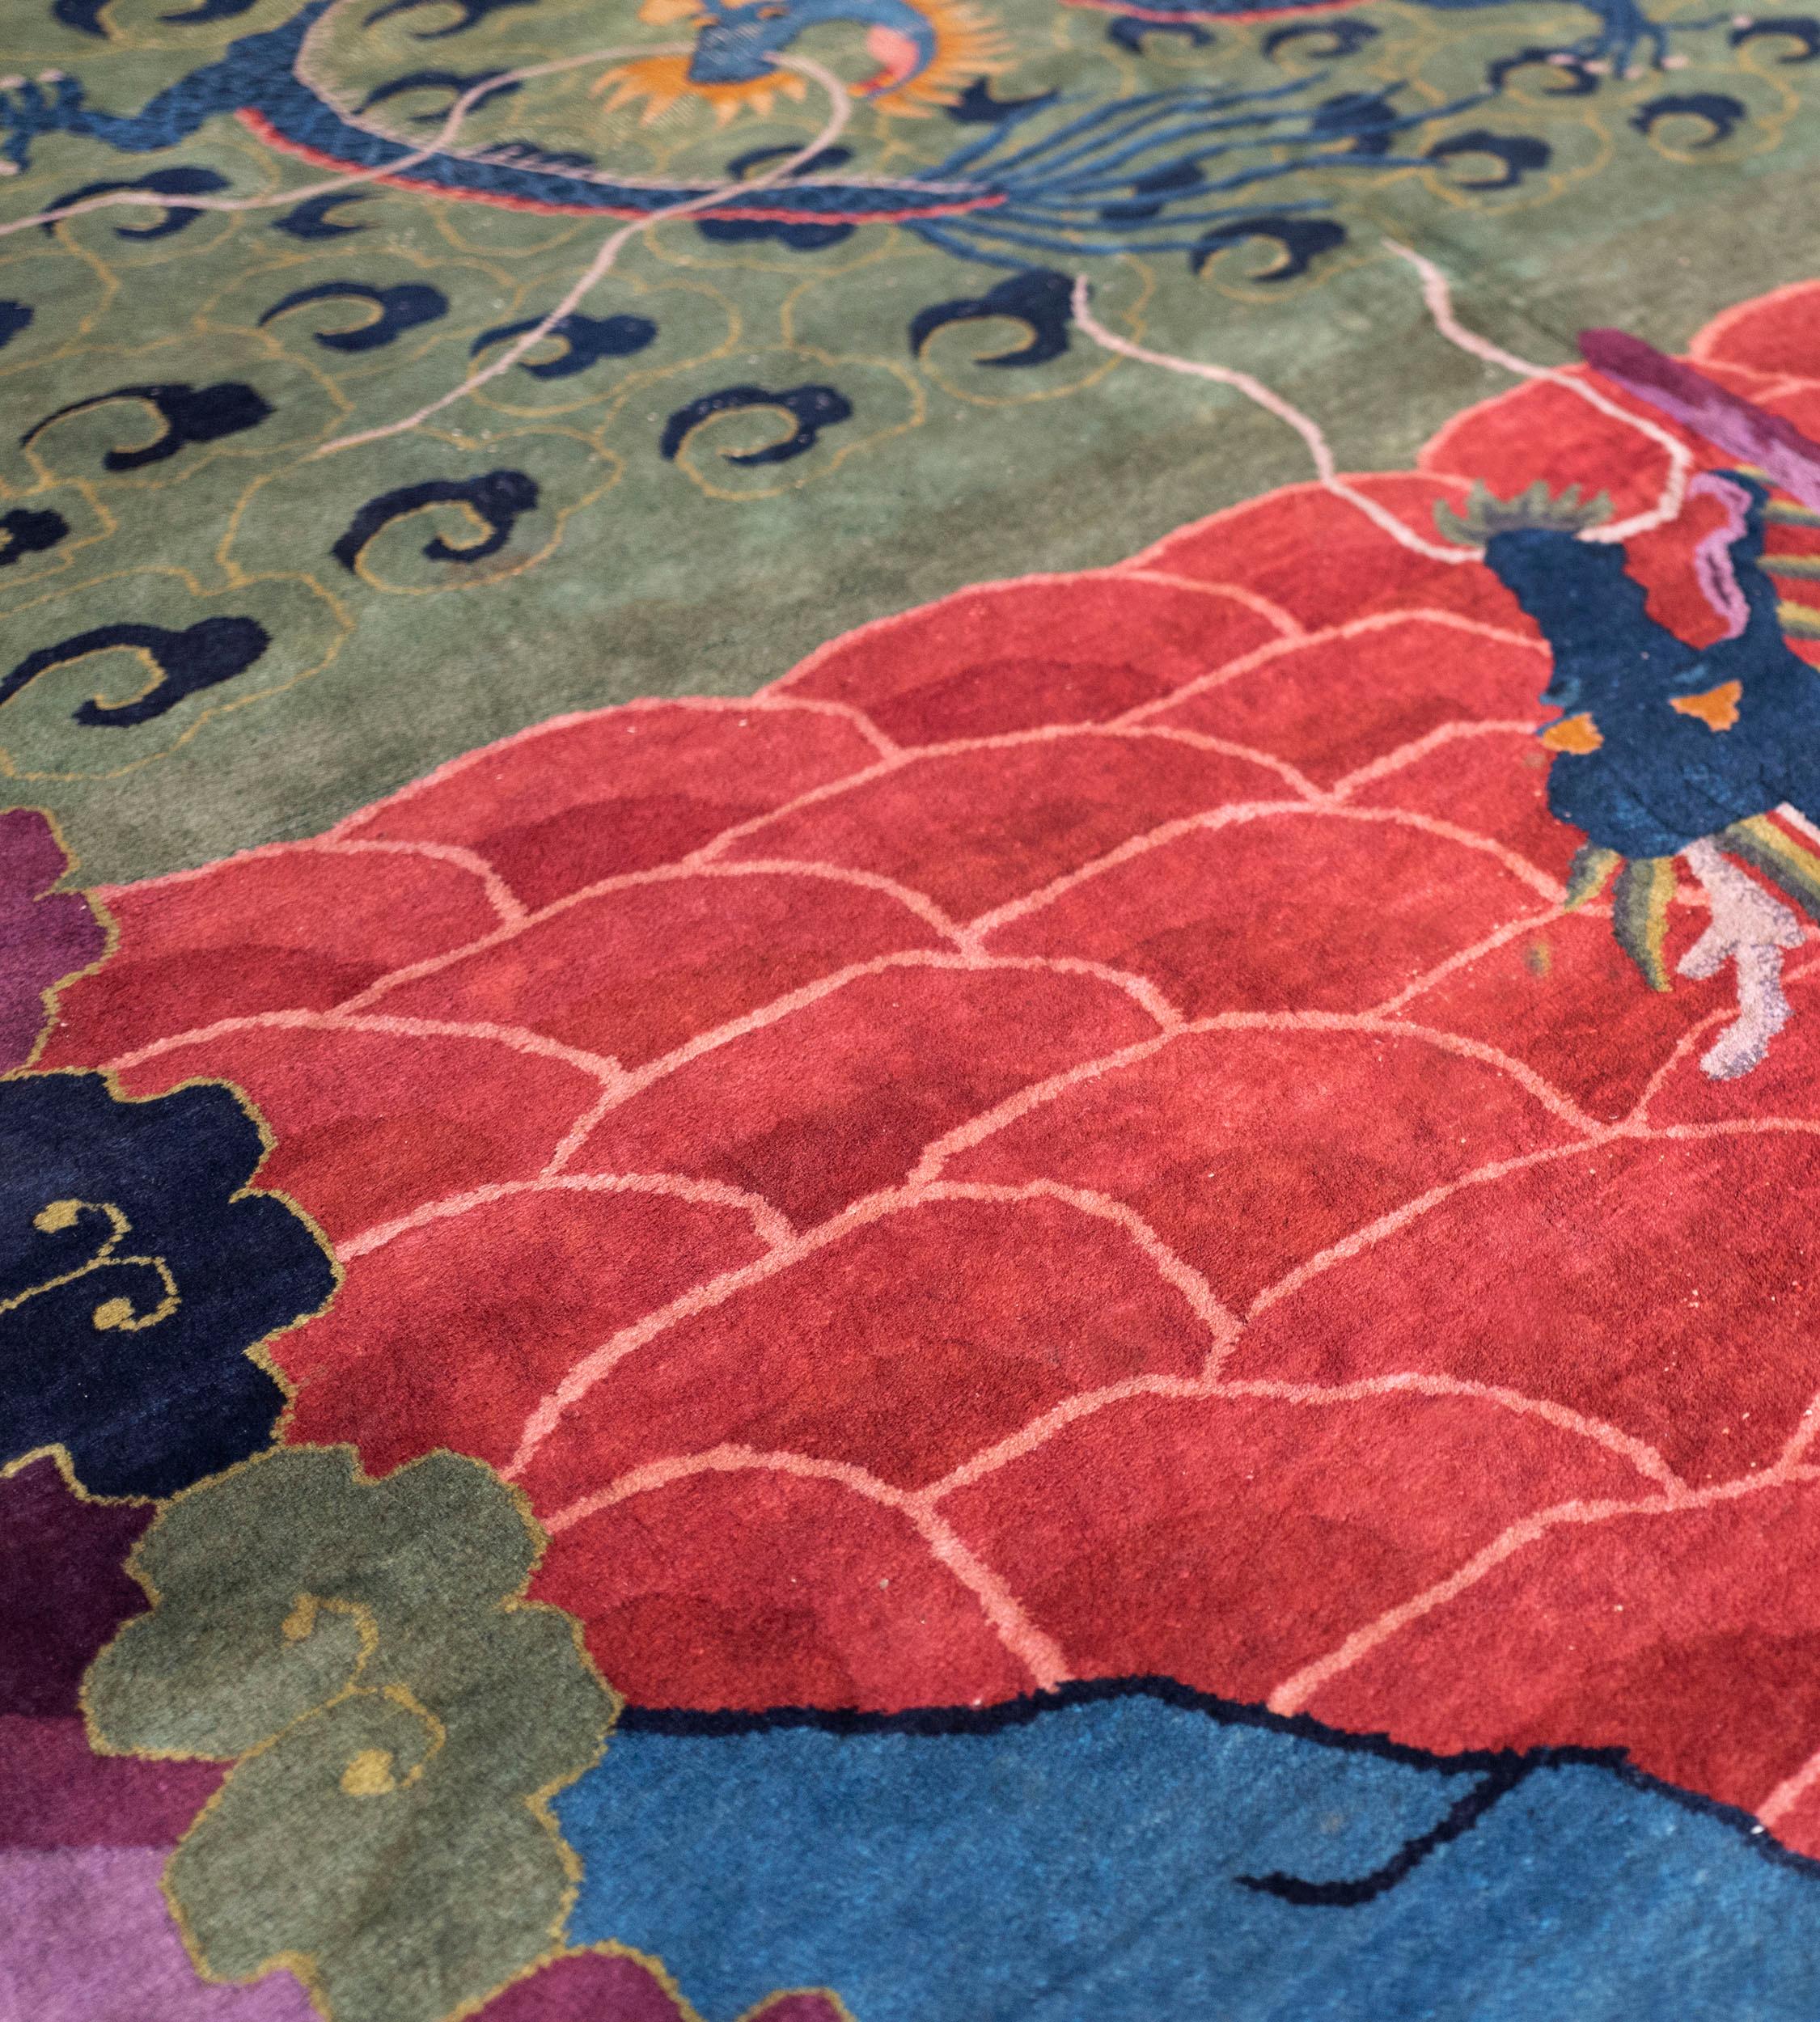 This antique Handwoven Chinese rug has a field with a central rectangular panel, the lower section with a bright orange-red part lozenge interlocking design with a central aubergine-purple pole with a stylized dragon climbing upwards, the above